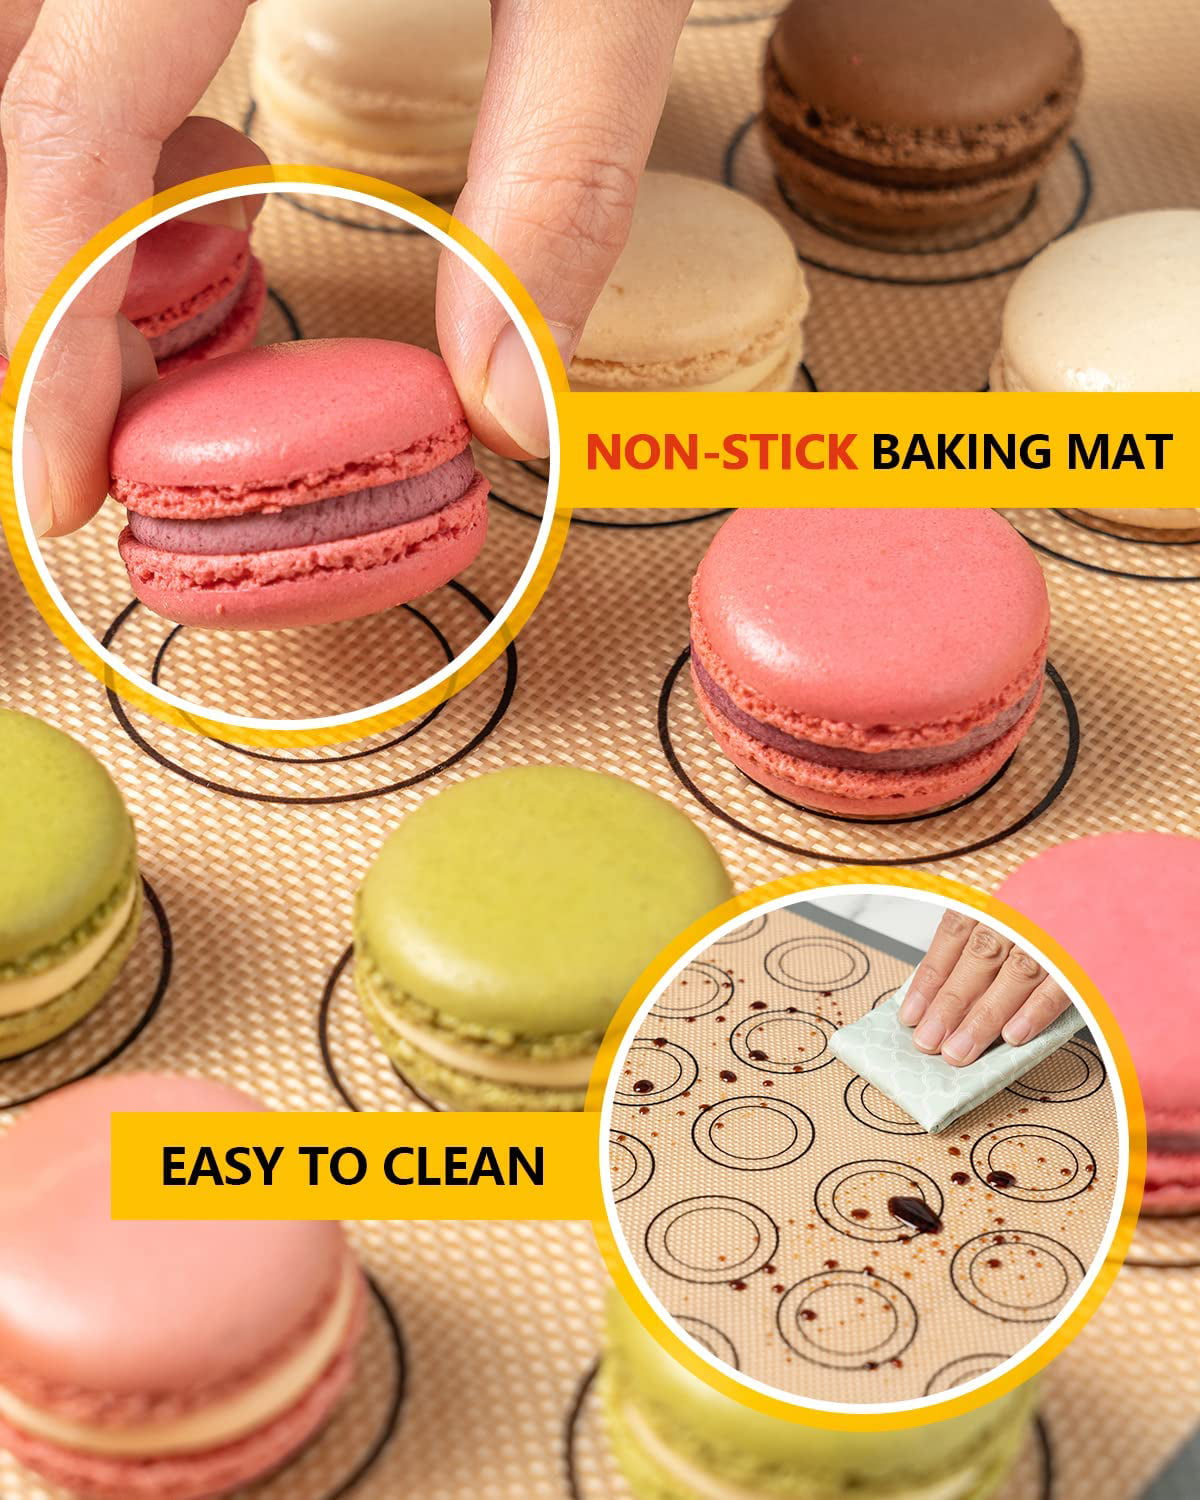 Macaron Silicone Mat Review